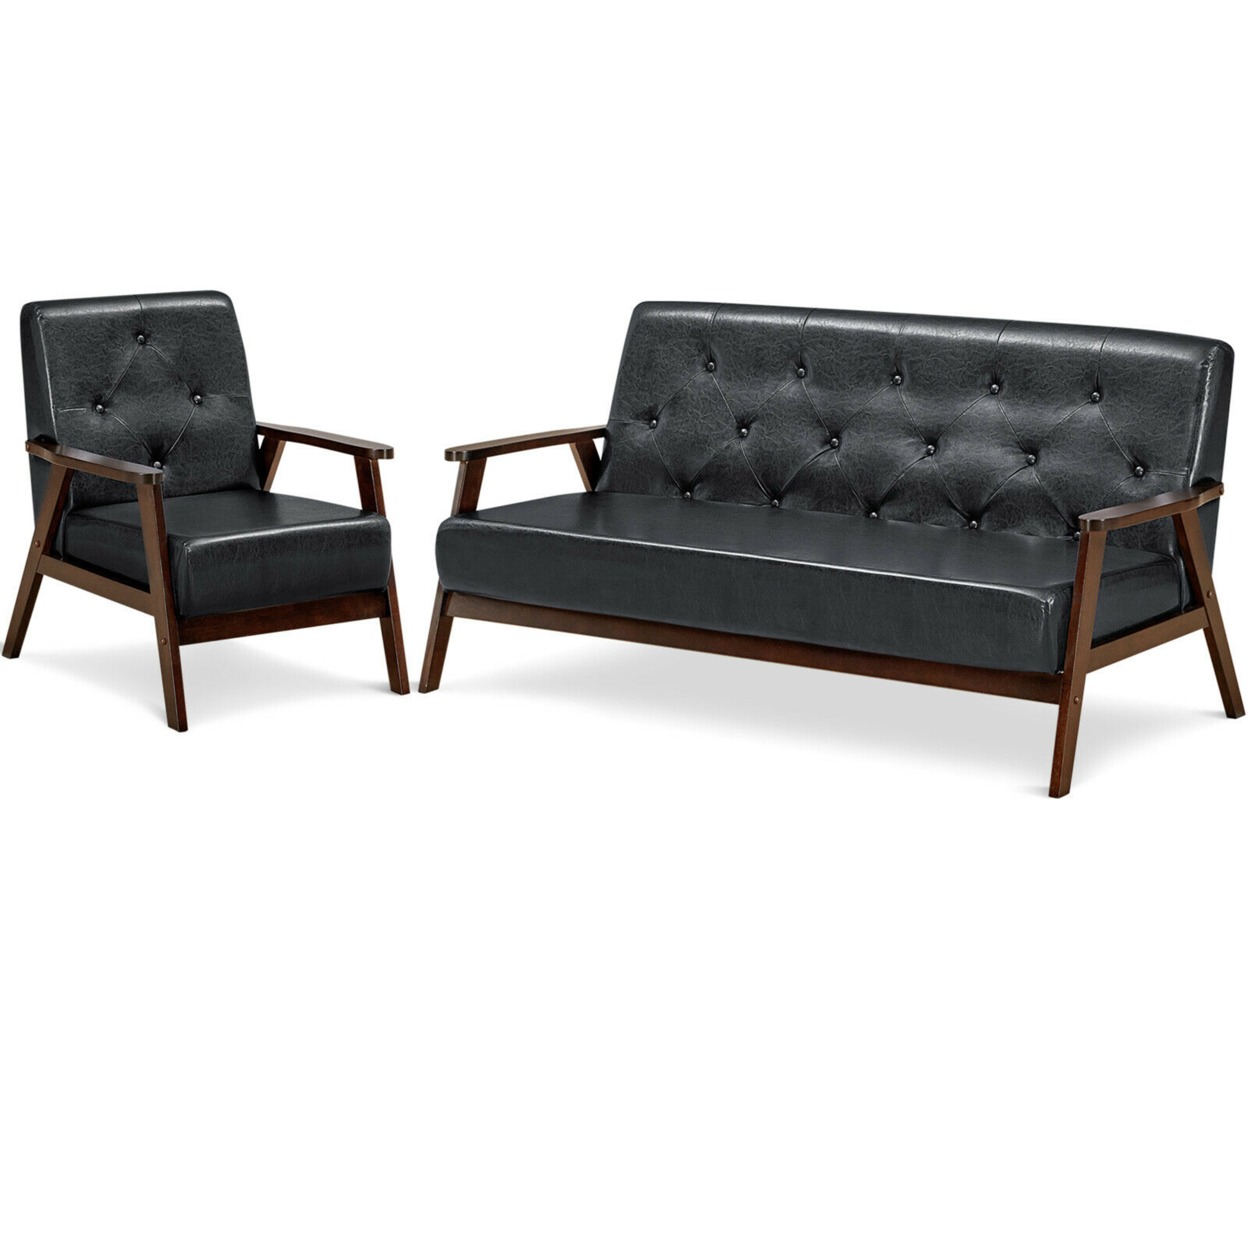 Classic 3-Seater Sofa & Accent Chair Set W/ Rubber Wood Legs & PU Leather Black